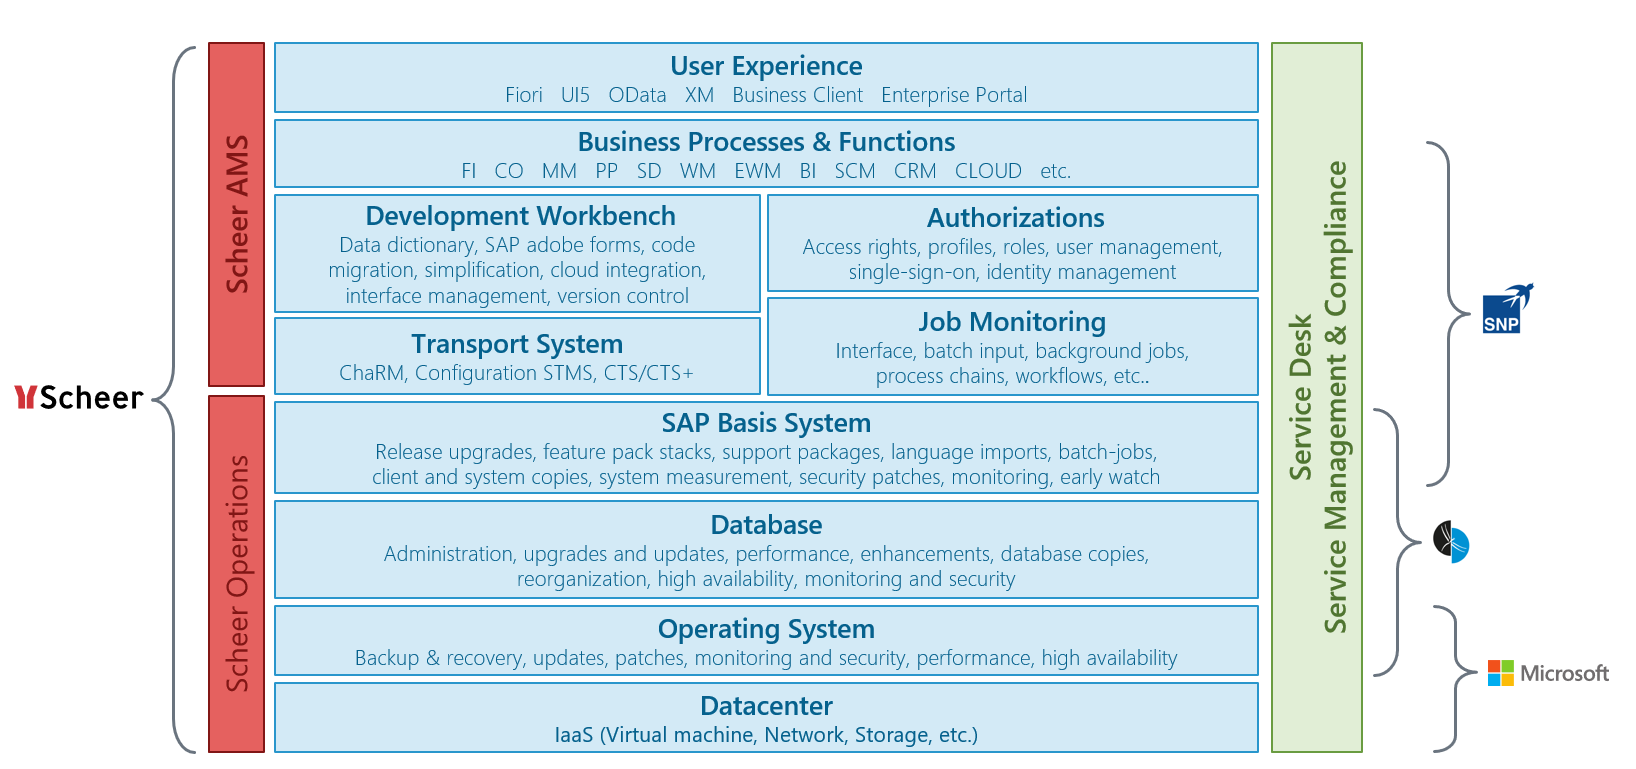 Overview of Scheer and its partnerships, including Microsoft and SNP An overview of various services and product solutions, e.g. User Experience, Business Processes & Functions, Development Workbench, Authorizations, Transport System, Job Monitoring, SAP Basis System, Database, Operating System, Data Center